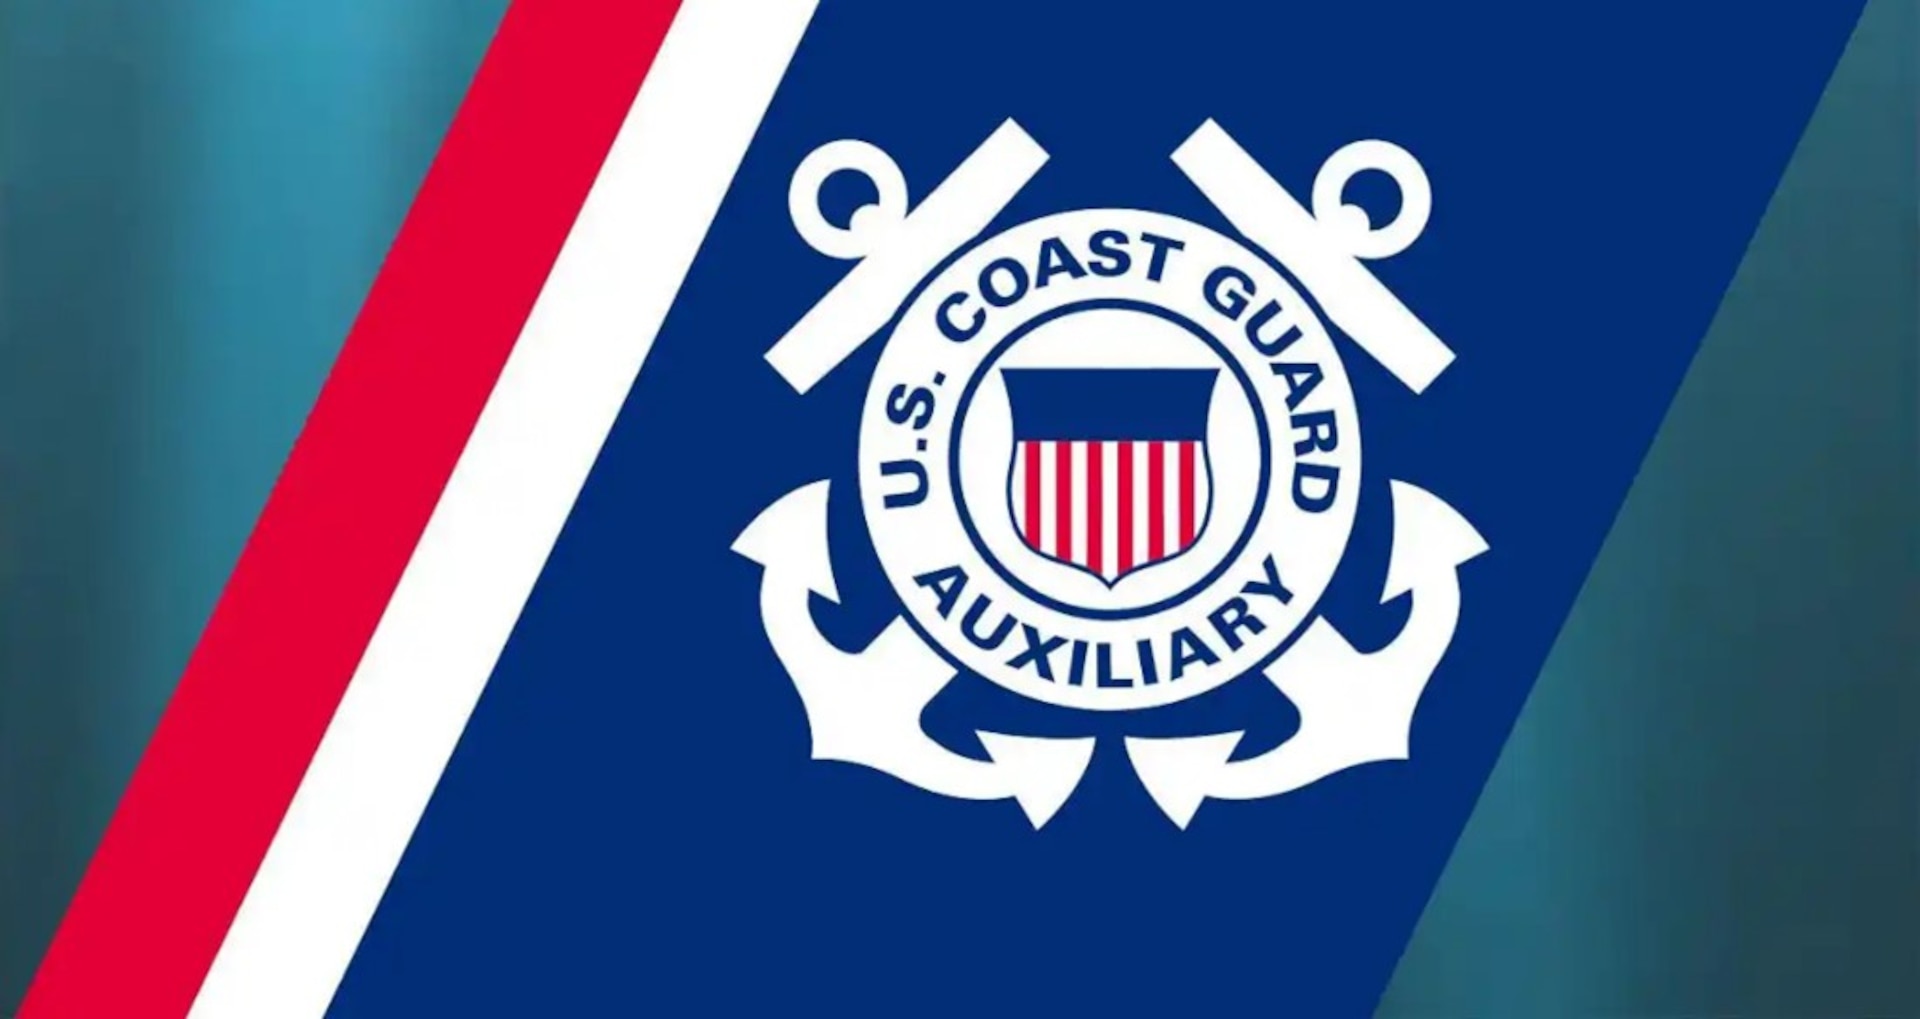 The CG units and individuals honored incorporated Auxiliary support and manpower to the greater benefit of the Coast Guard in innovative and impactful manners.